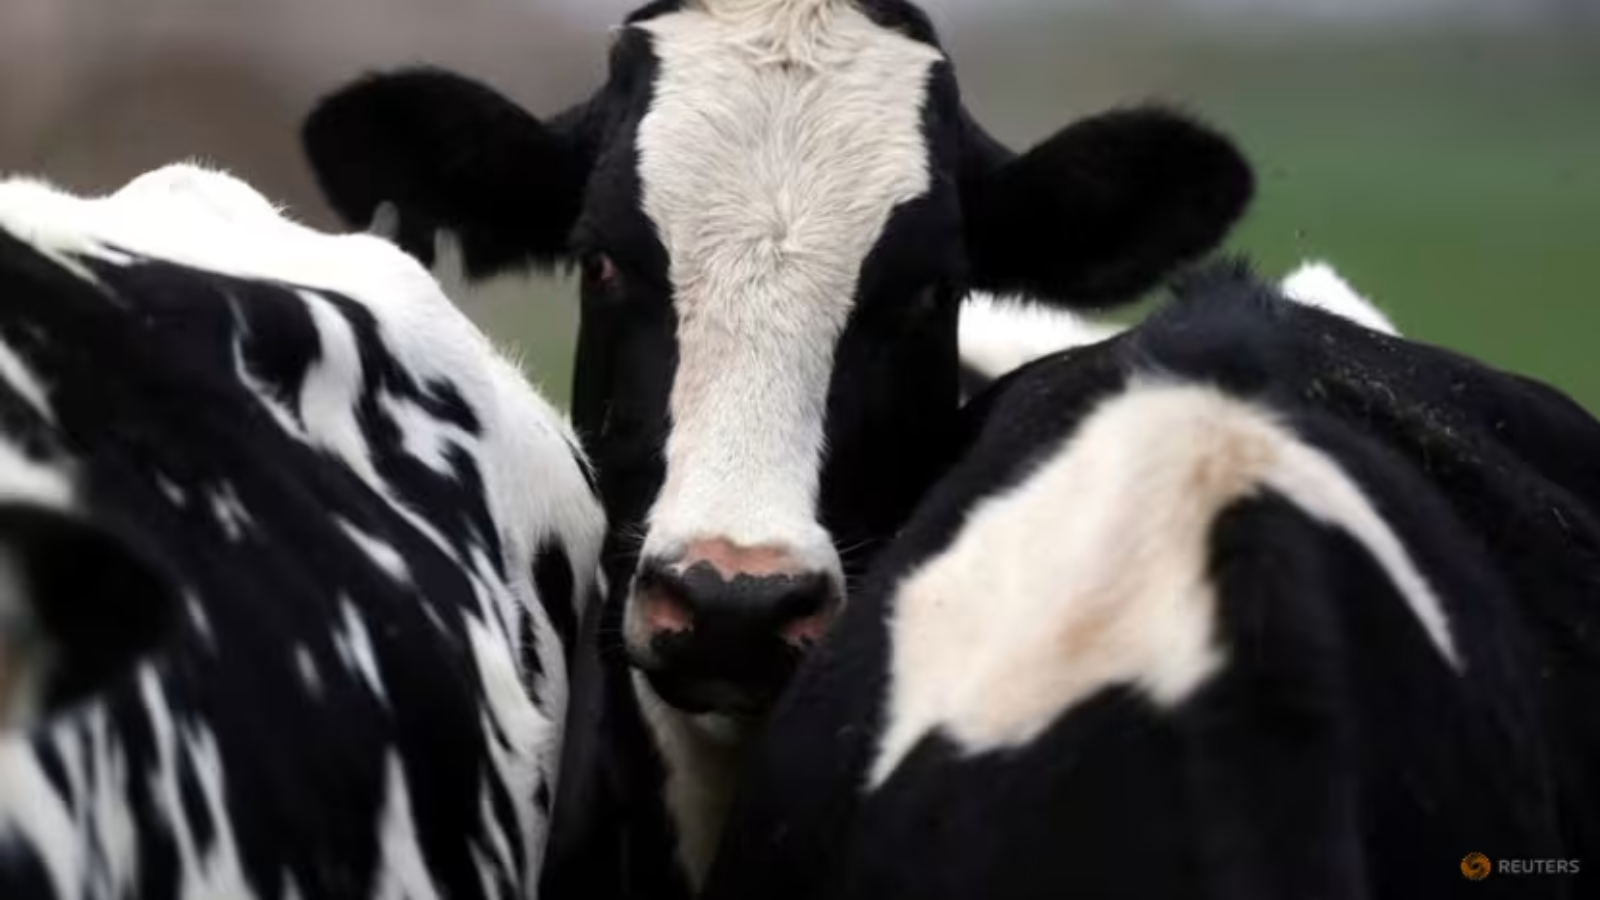 H5N1 Bird Flu Virus Found in Raw Milk from Infected Cows, WHO Reports